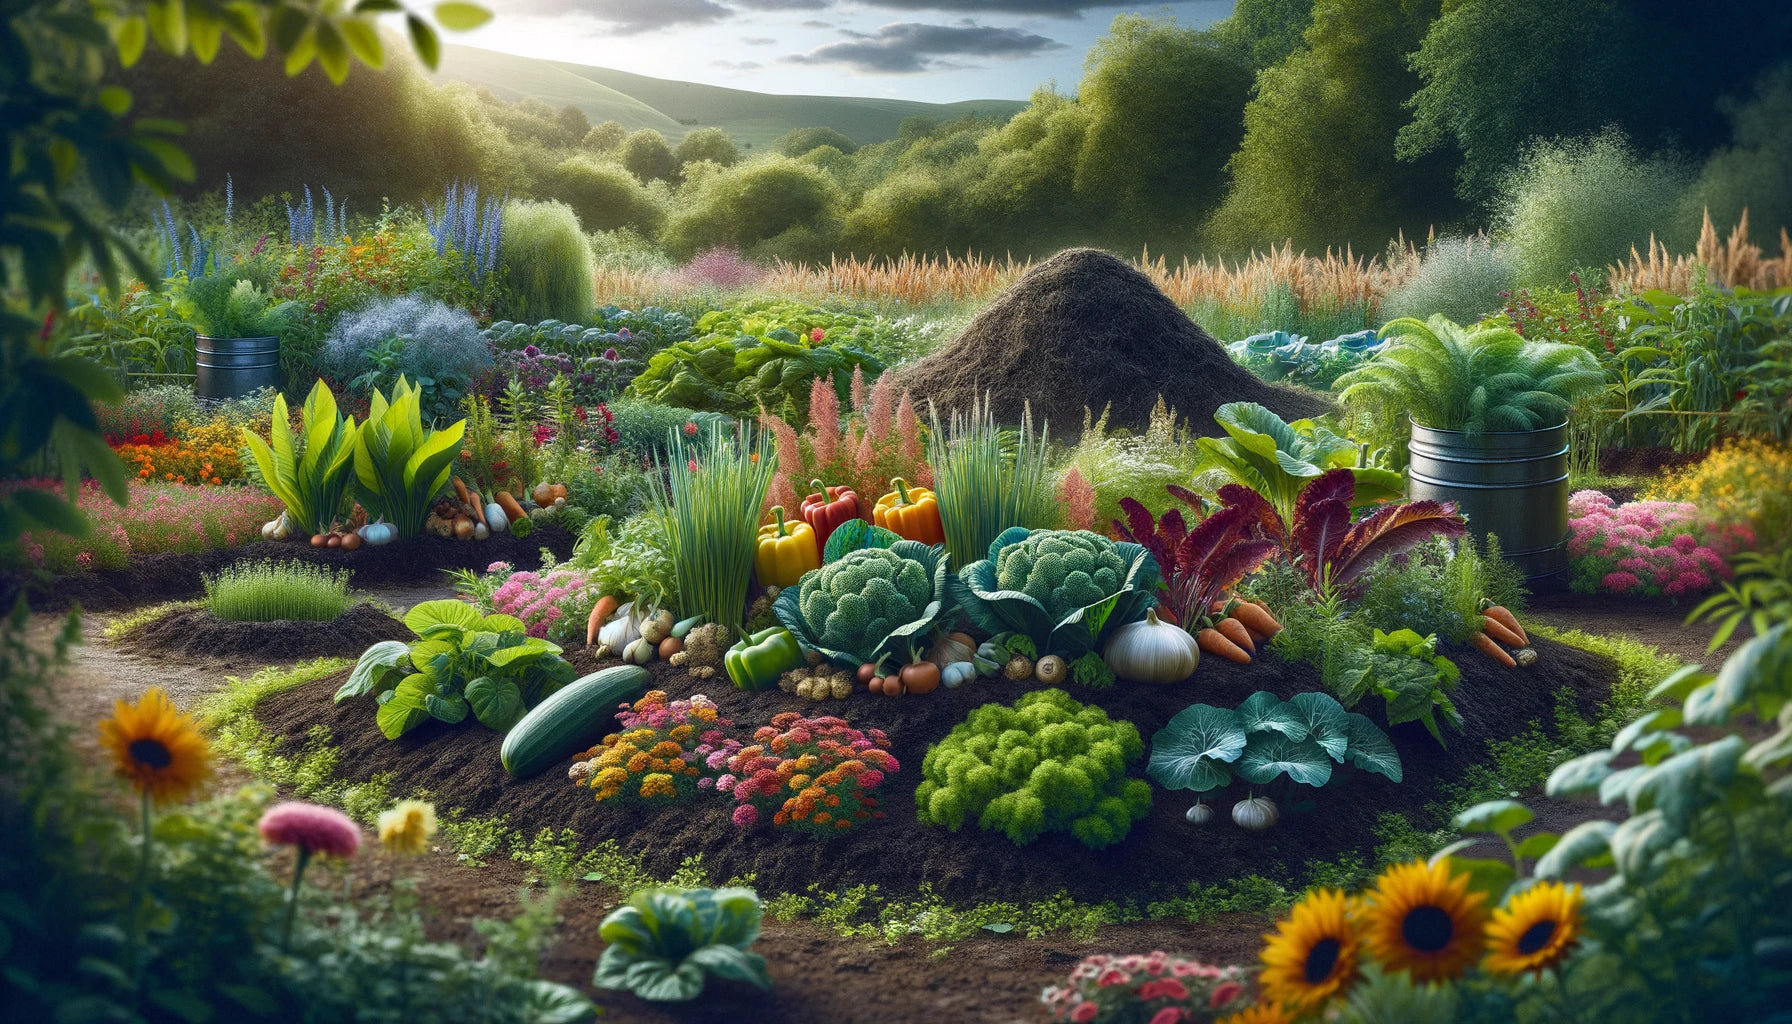  vibrant and picturesque natural farm scene, illustrating a variety of colorful and healthy plants thriving in rich, dark soil. The farm displays a diversity of crops, interspersed with flowering plants, and features a compost heap in the background. 